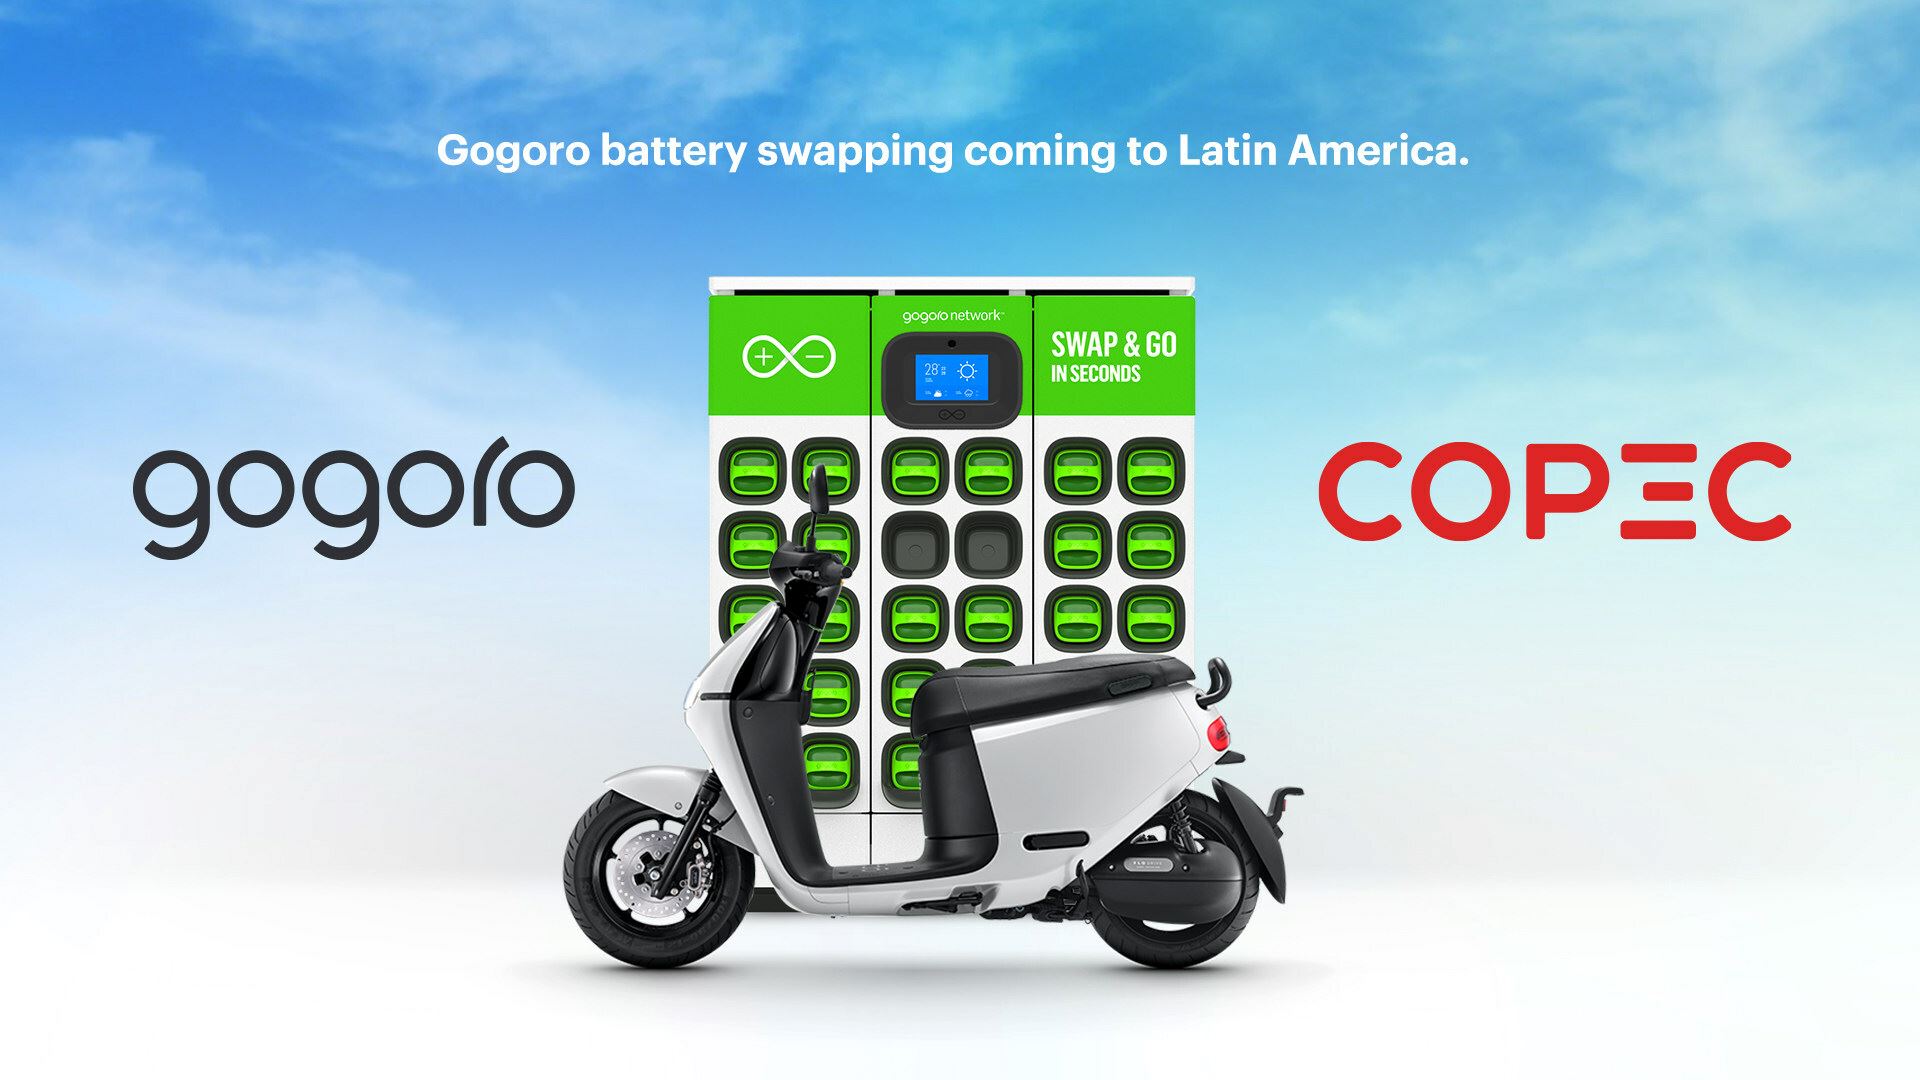 Gogoro Copec to Launch Two wheel Battery Swapping Ecosystem in Latin America